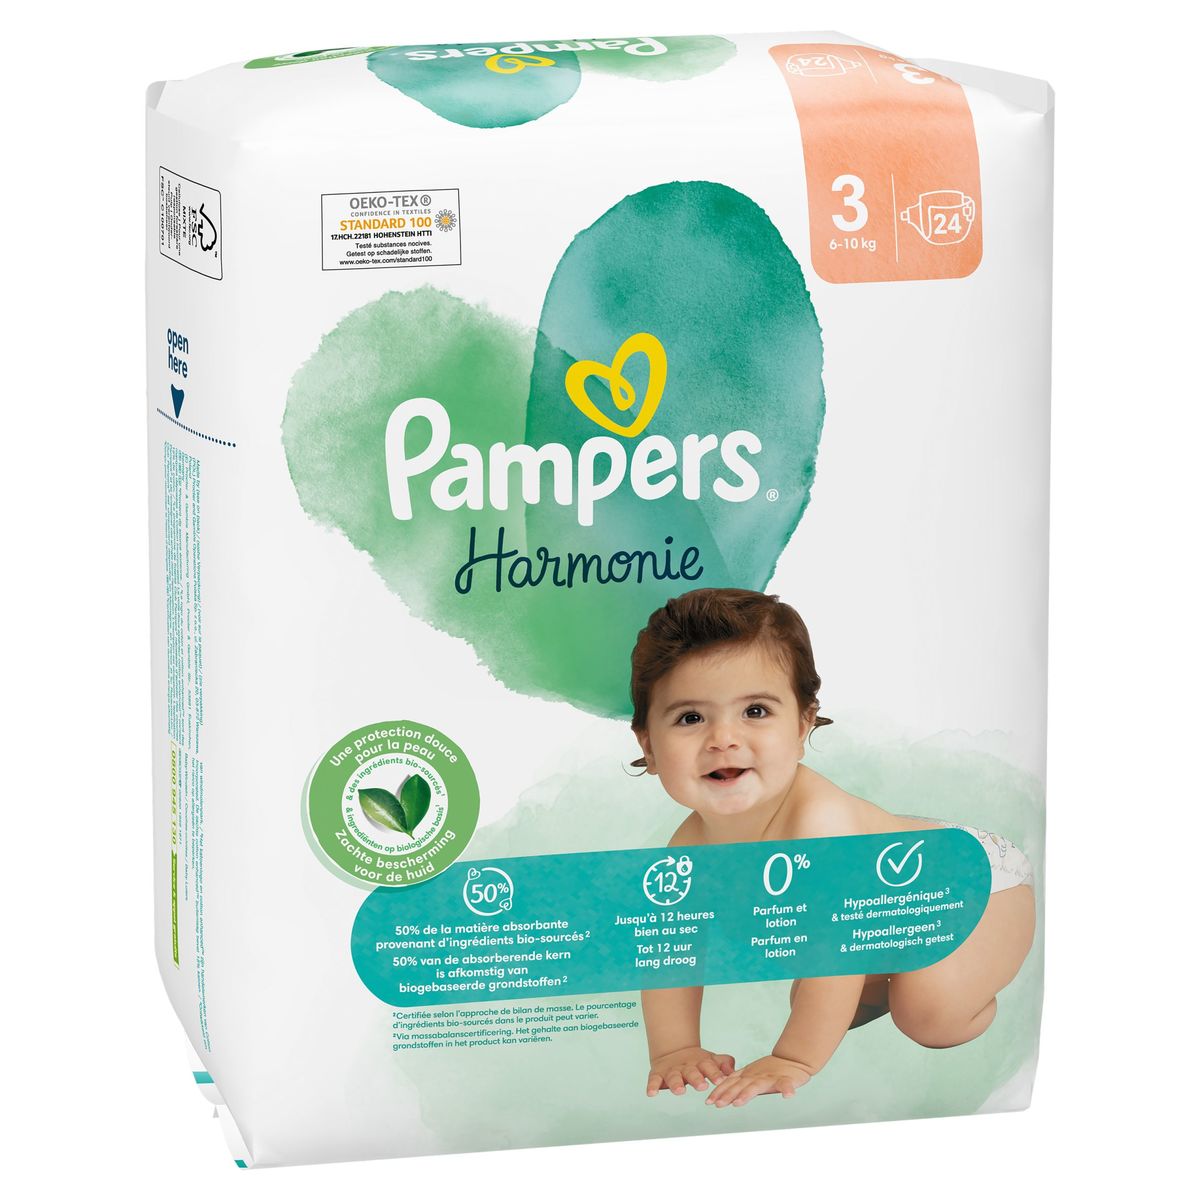 PAMPERS Harmonie langes taille 4 20pc